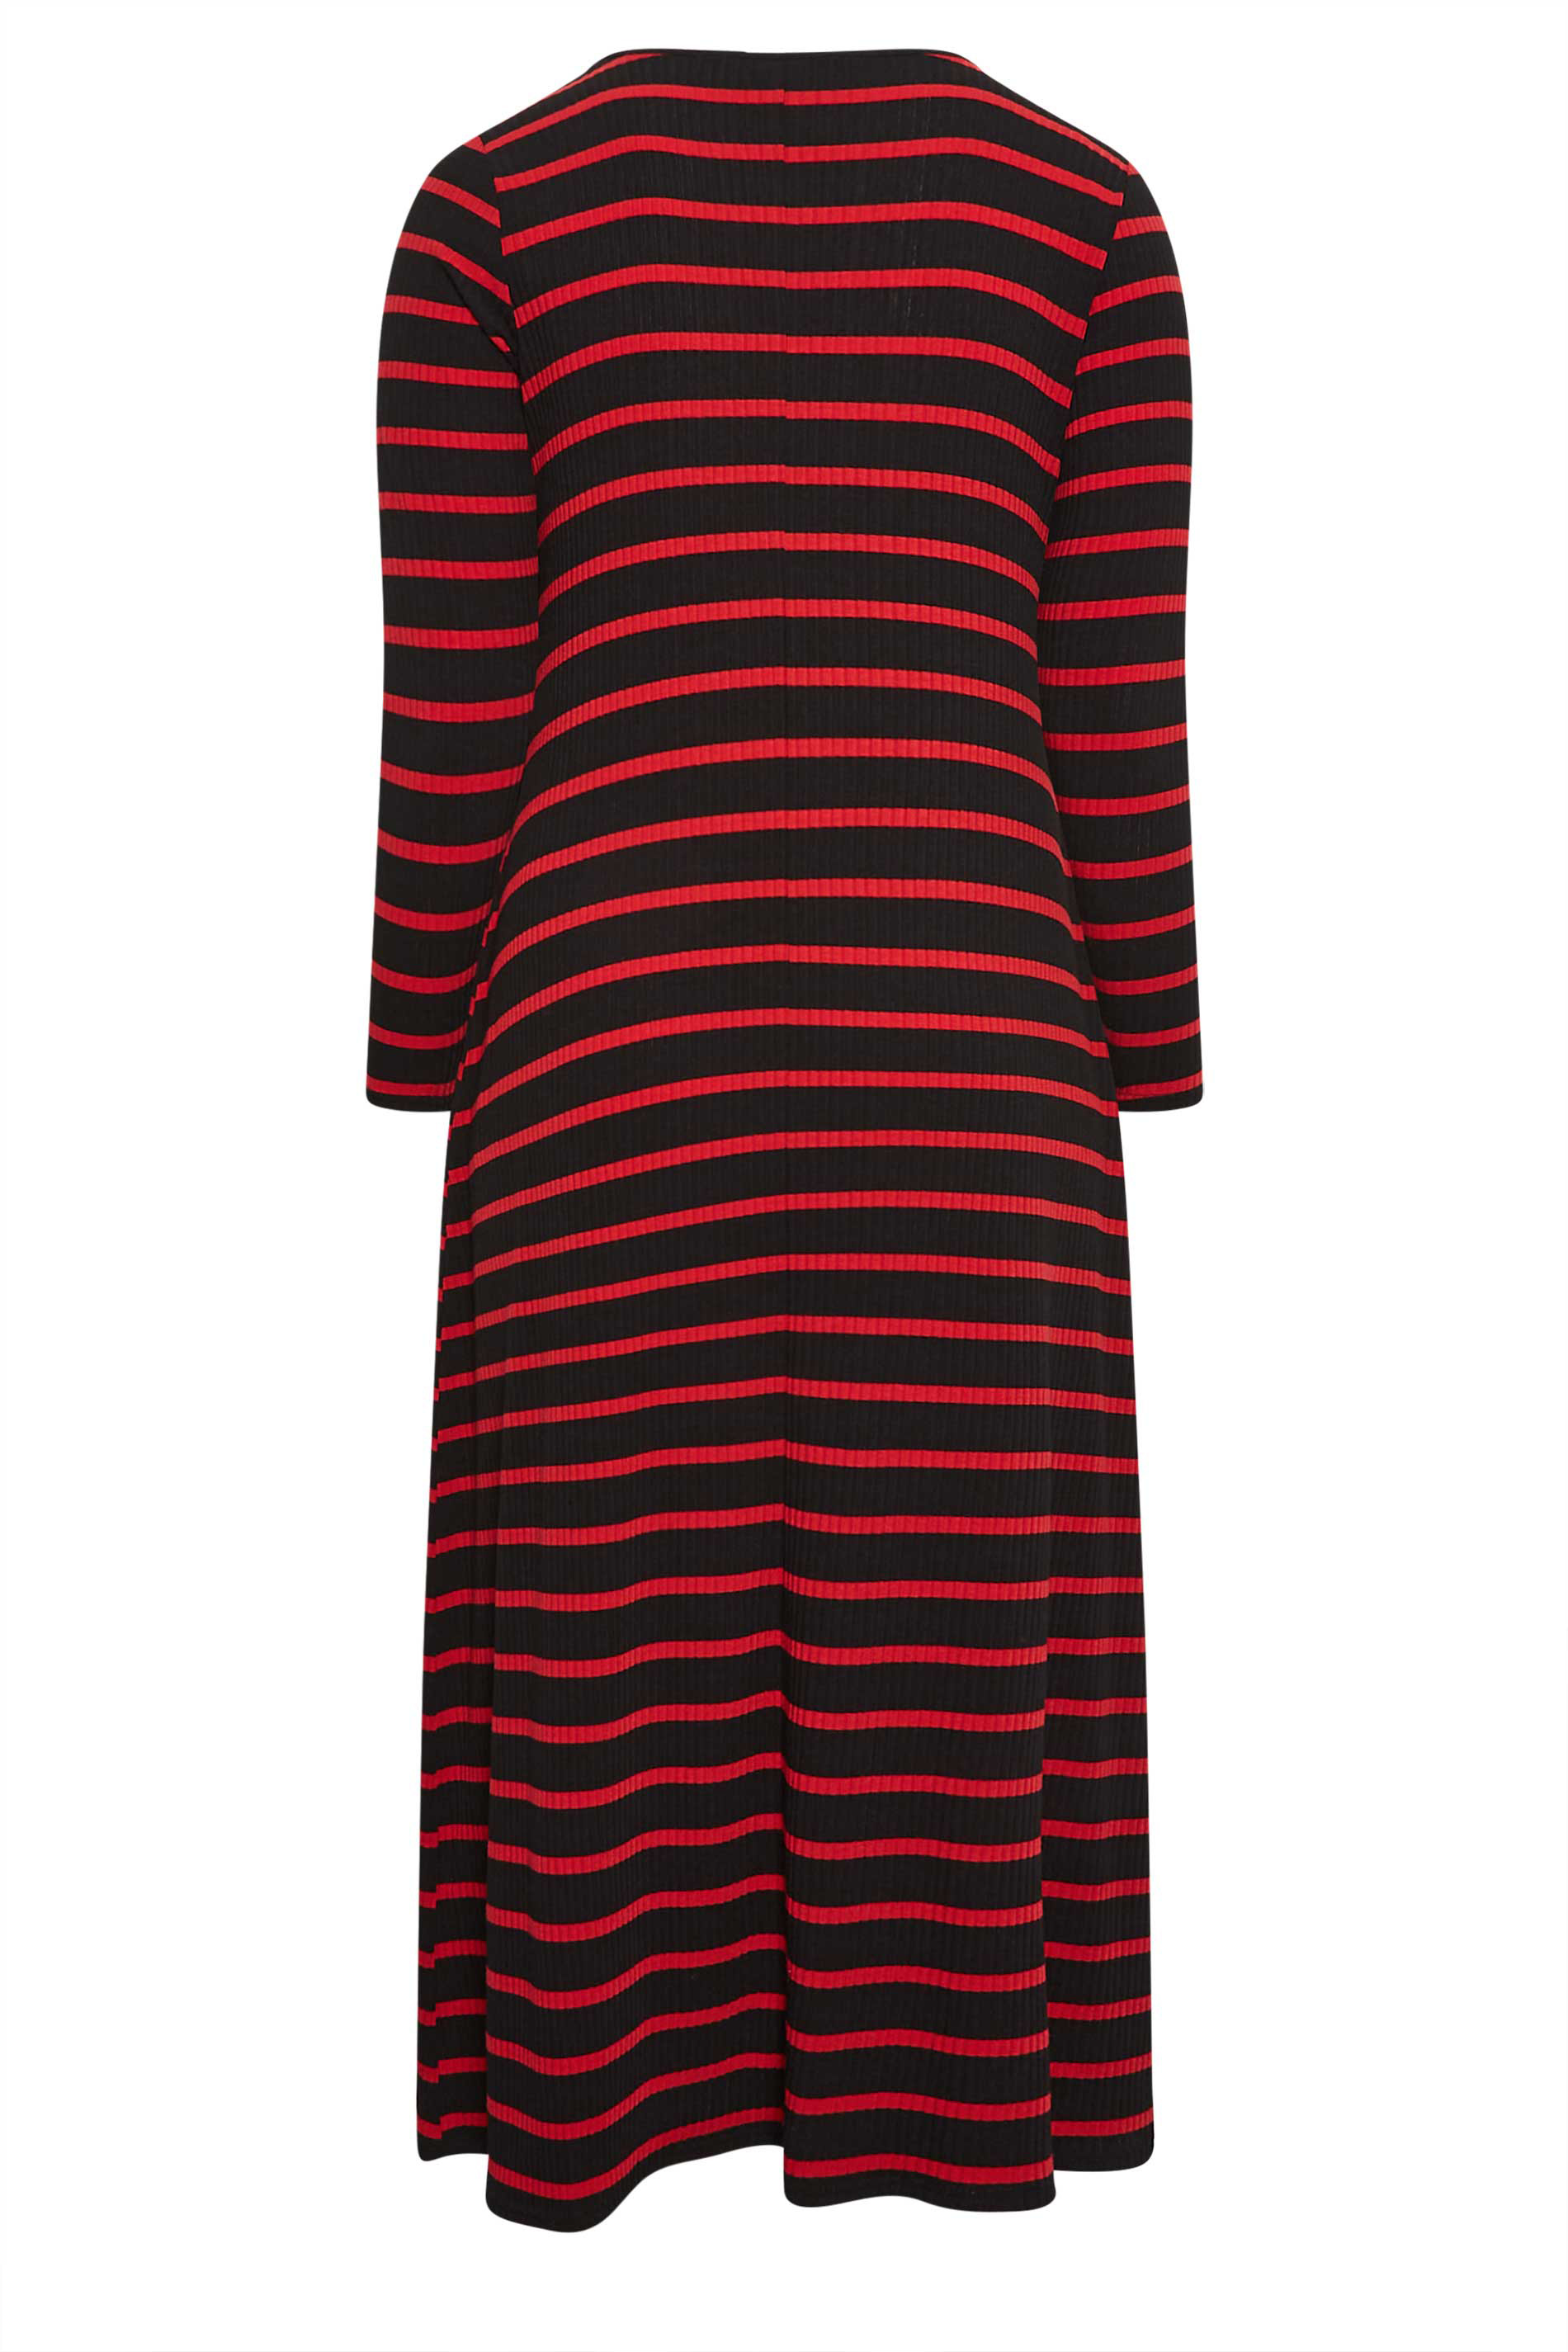 YOURS Curve Ribbed | Clothing Red Maxi Striped Dress Swing Sleeve Long Yours